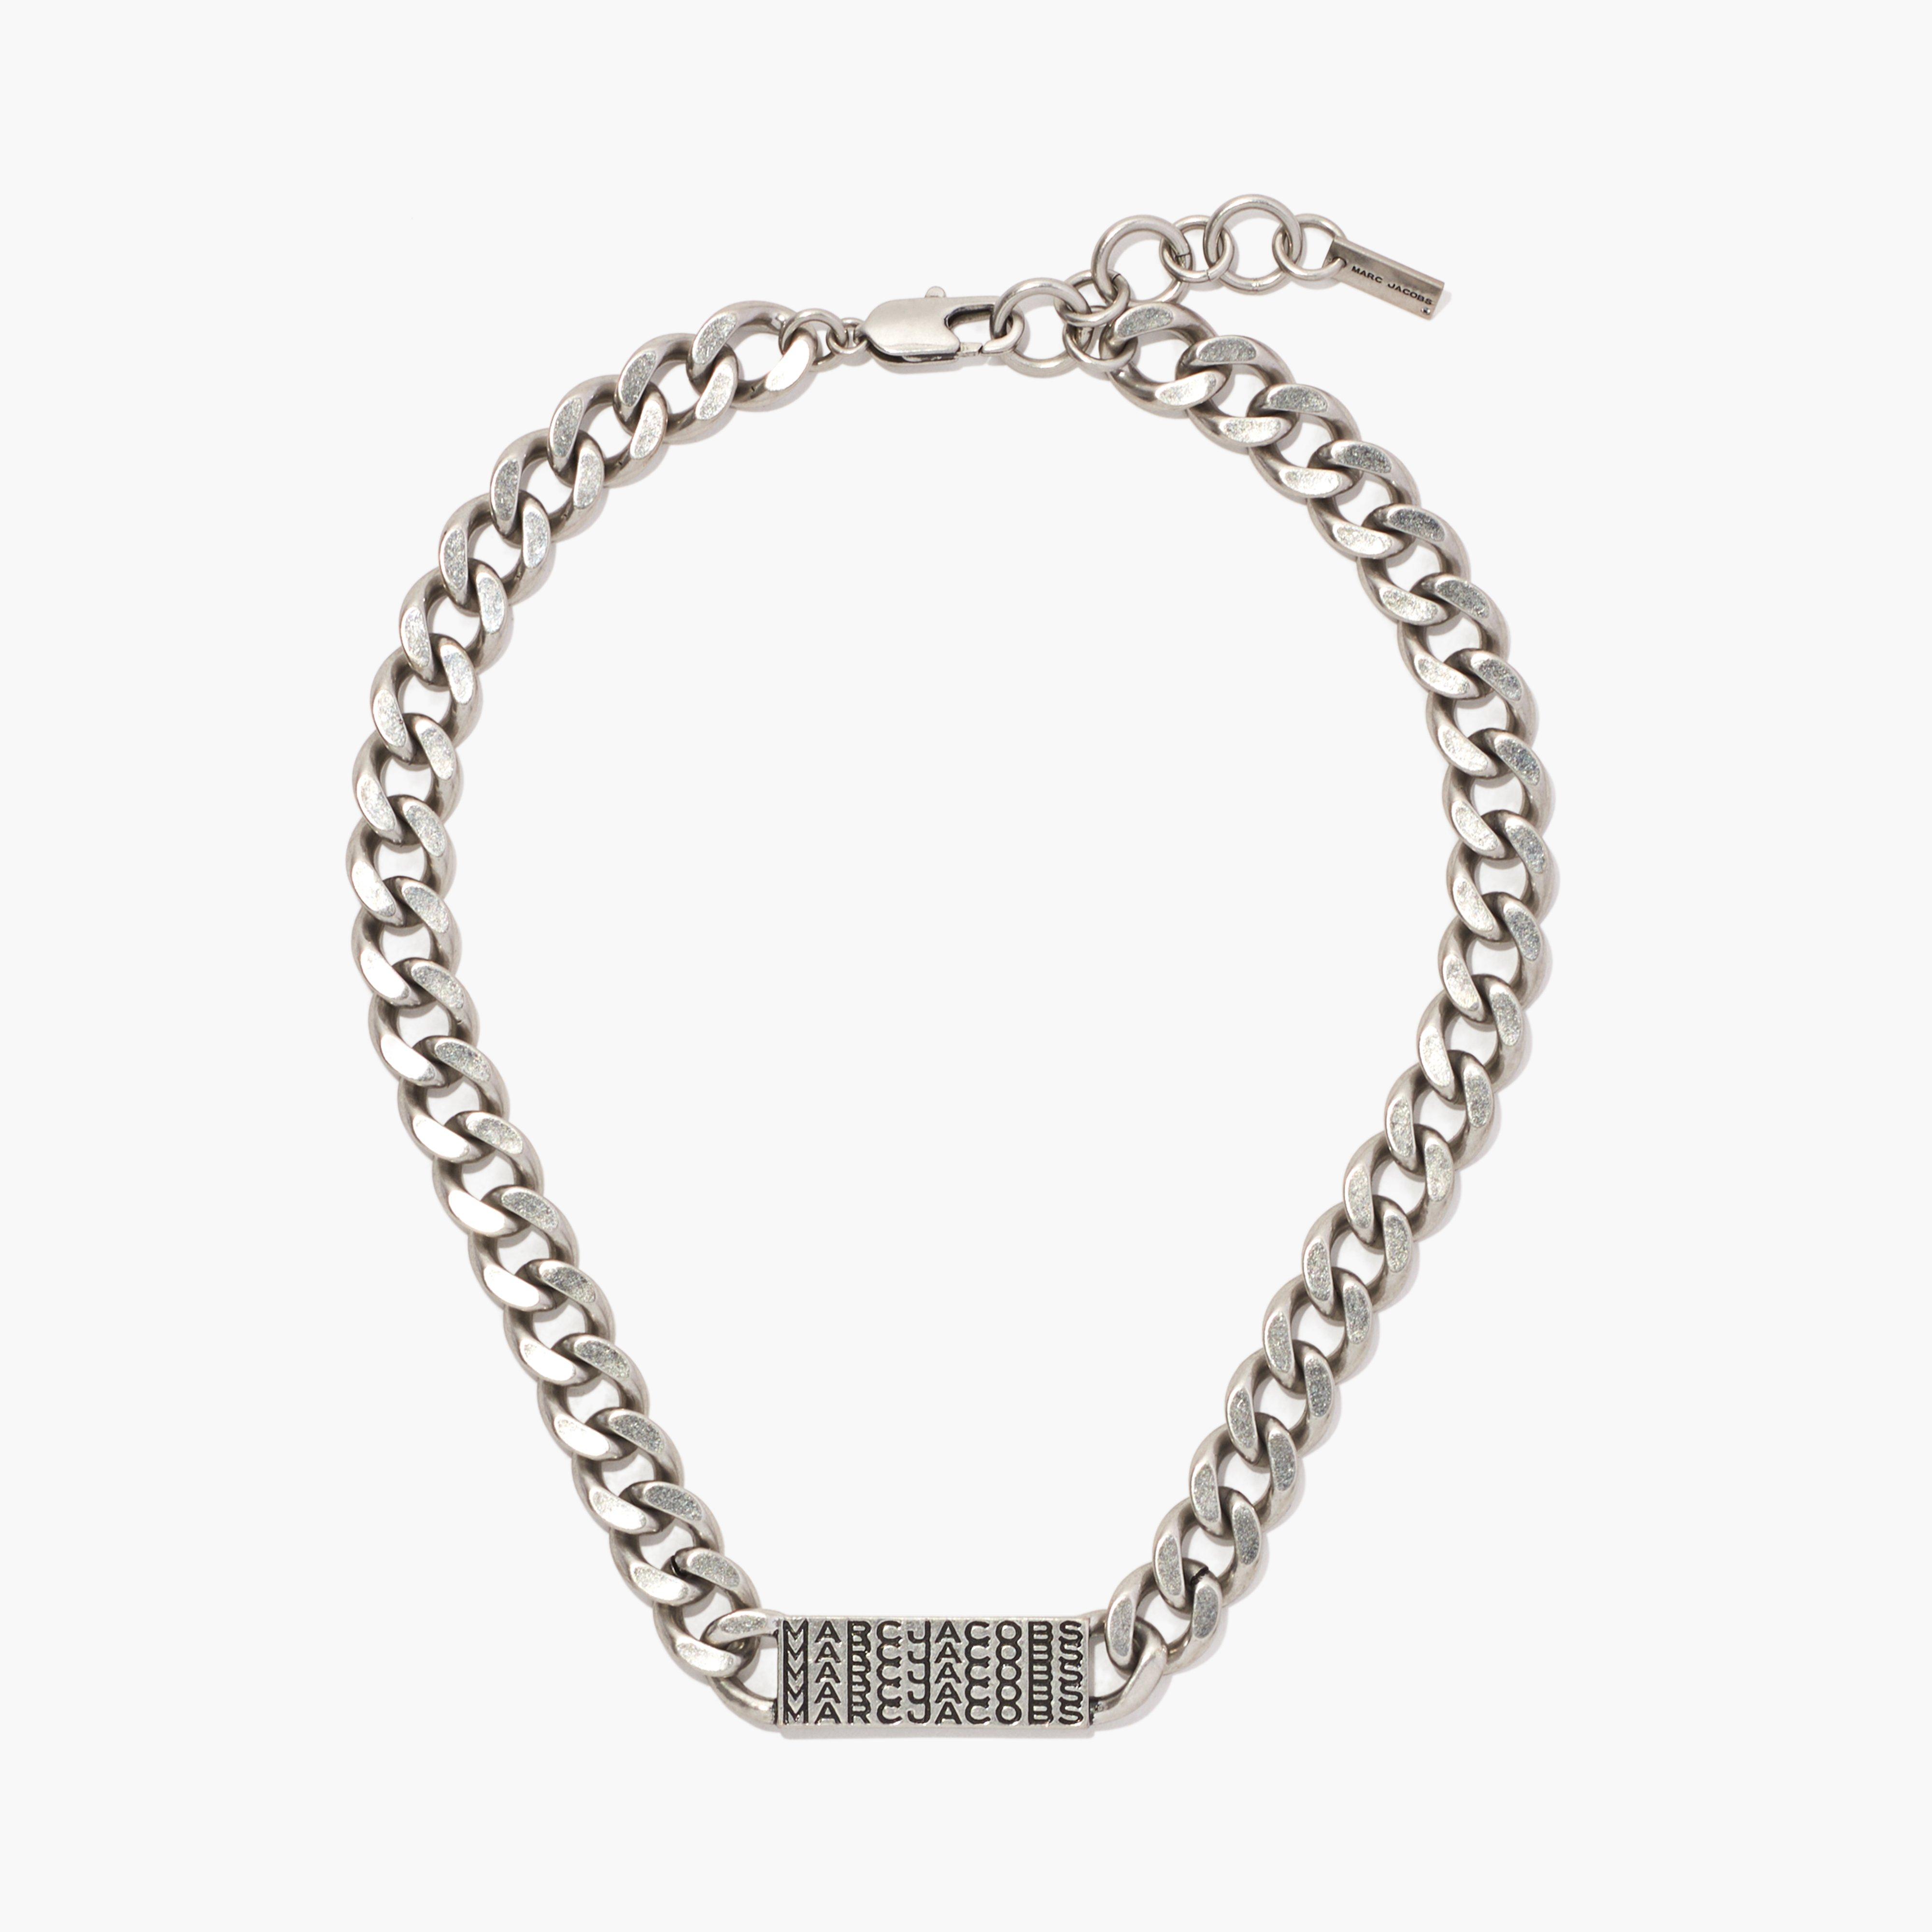 Marc by Marc jacobs The Barcode Monogram ID Chain Necklace,AGED SILVER